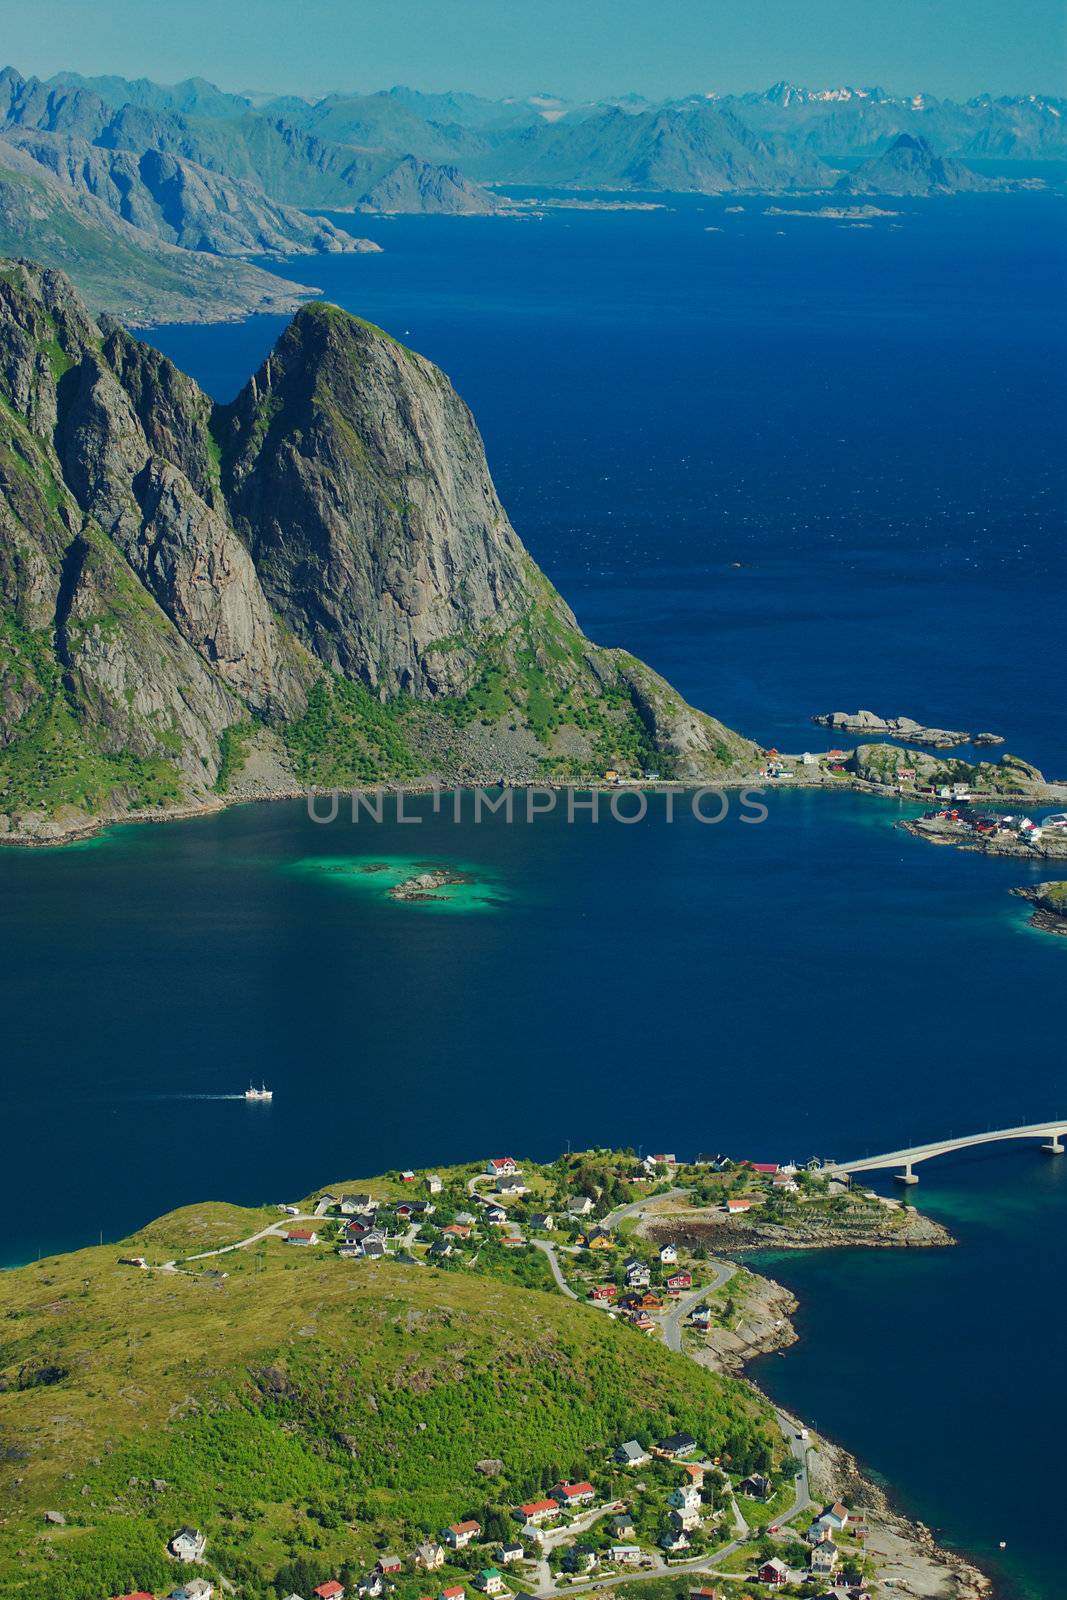 The little town of Reine on the Norwegian island group called Lofoten, which rugged mountain scenery is visible in the background. The picture was taken from a hiking trail to a nearby mountain peak.